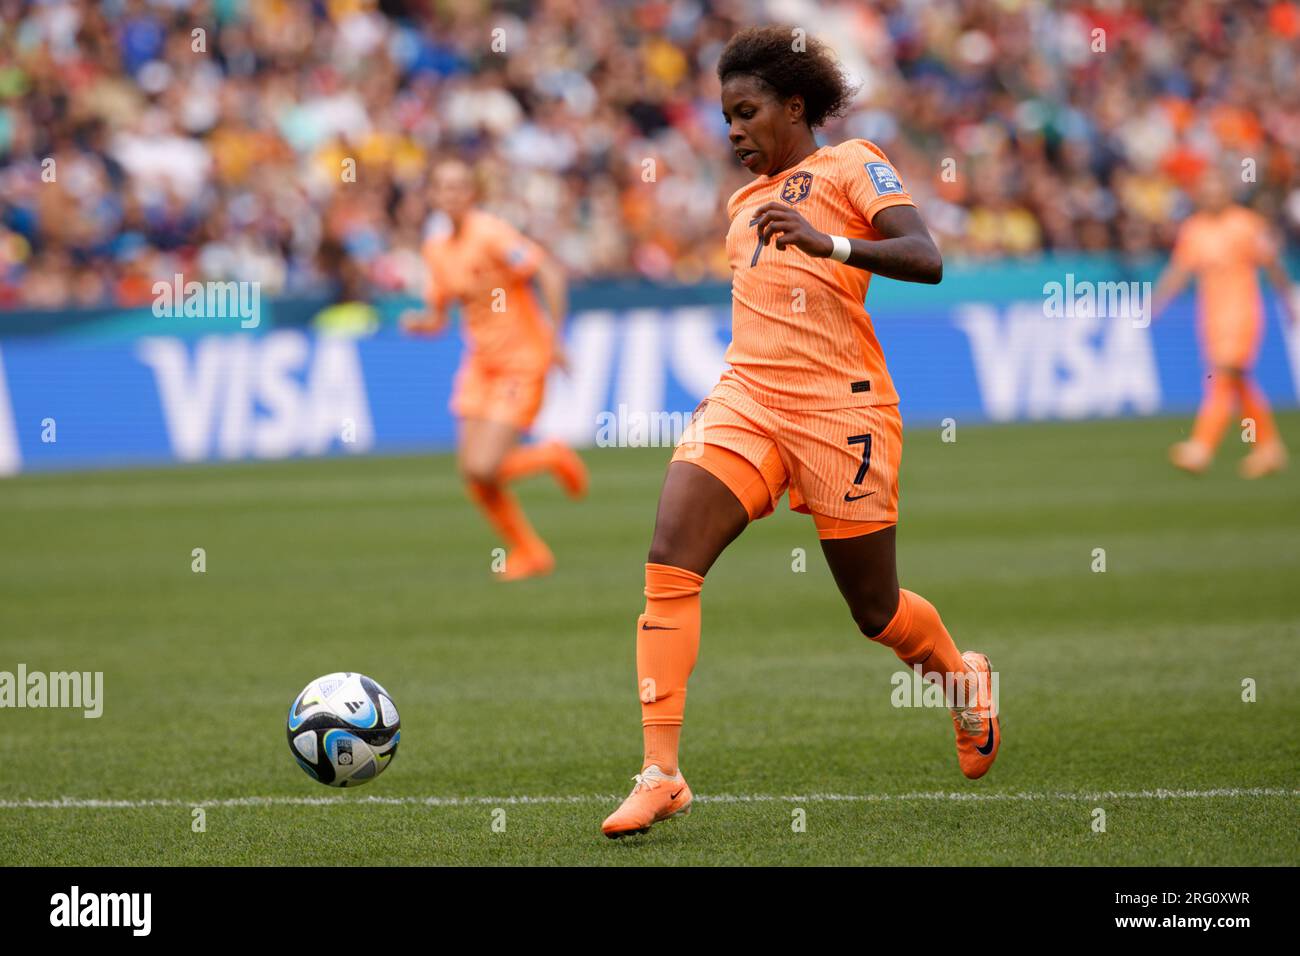 Sydney, Australia. 06th Aug, 2023. Lineth Beerensteyn of Netherlands controls the ball during the FIFA Women's World Cup 2023 Round of 16 match between Netherlands and South Africa at Sydney Football Stadium on August 6, 2023 in Sydney, Australia Credit: IOIO IMAGES/Alamy Live News Stock Photo